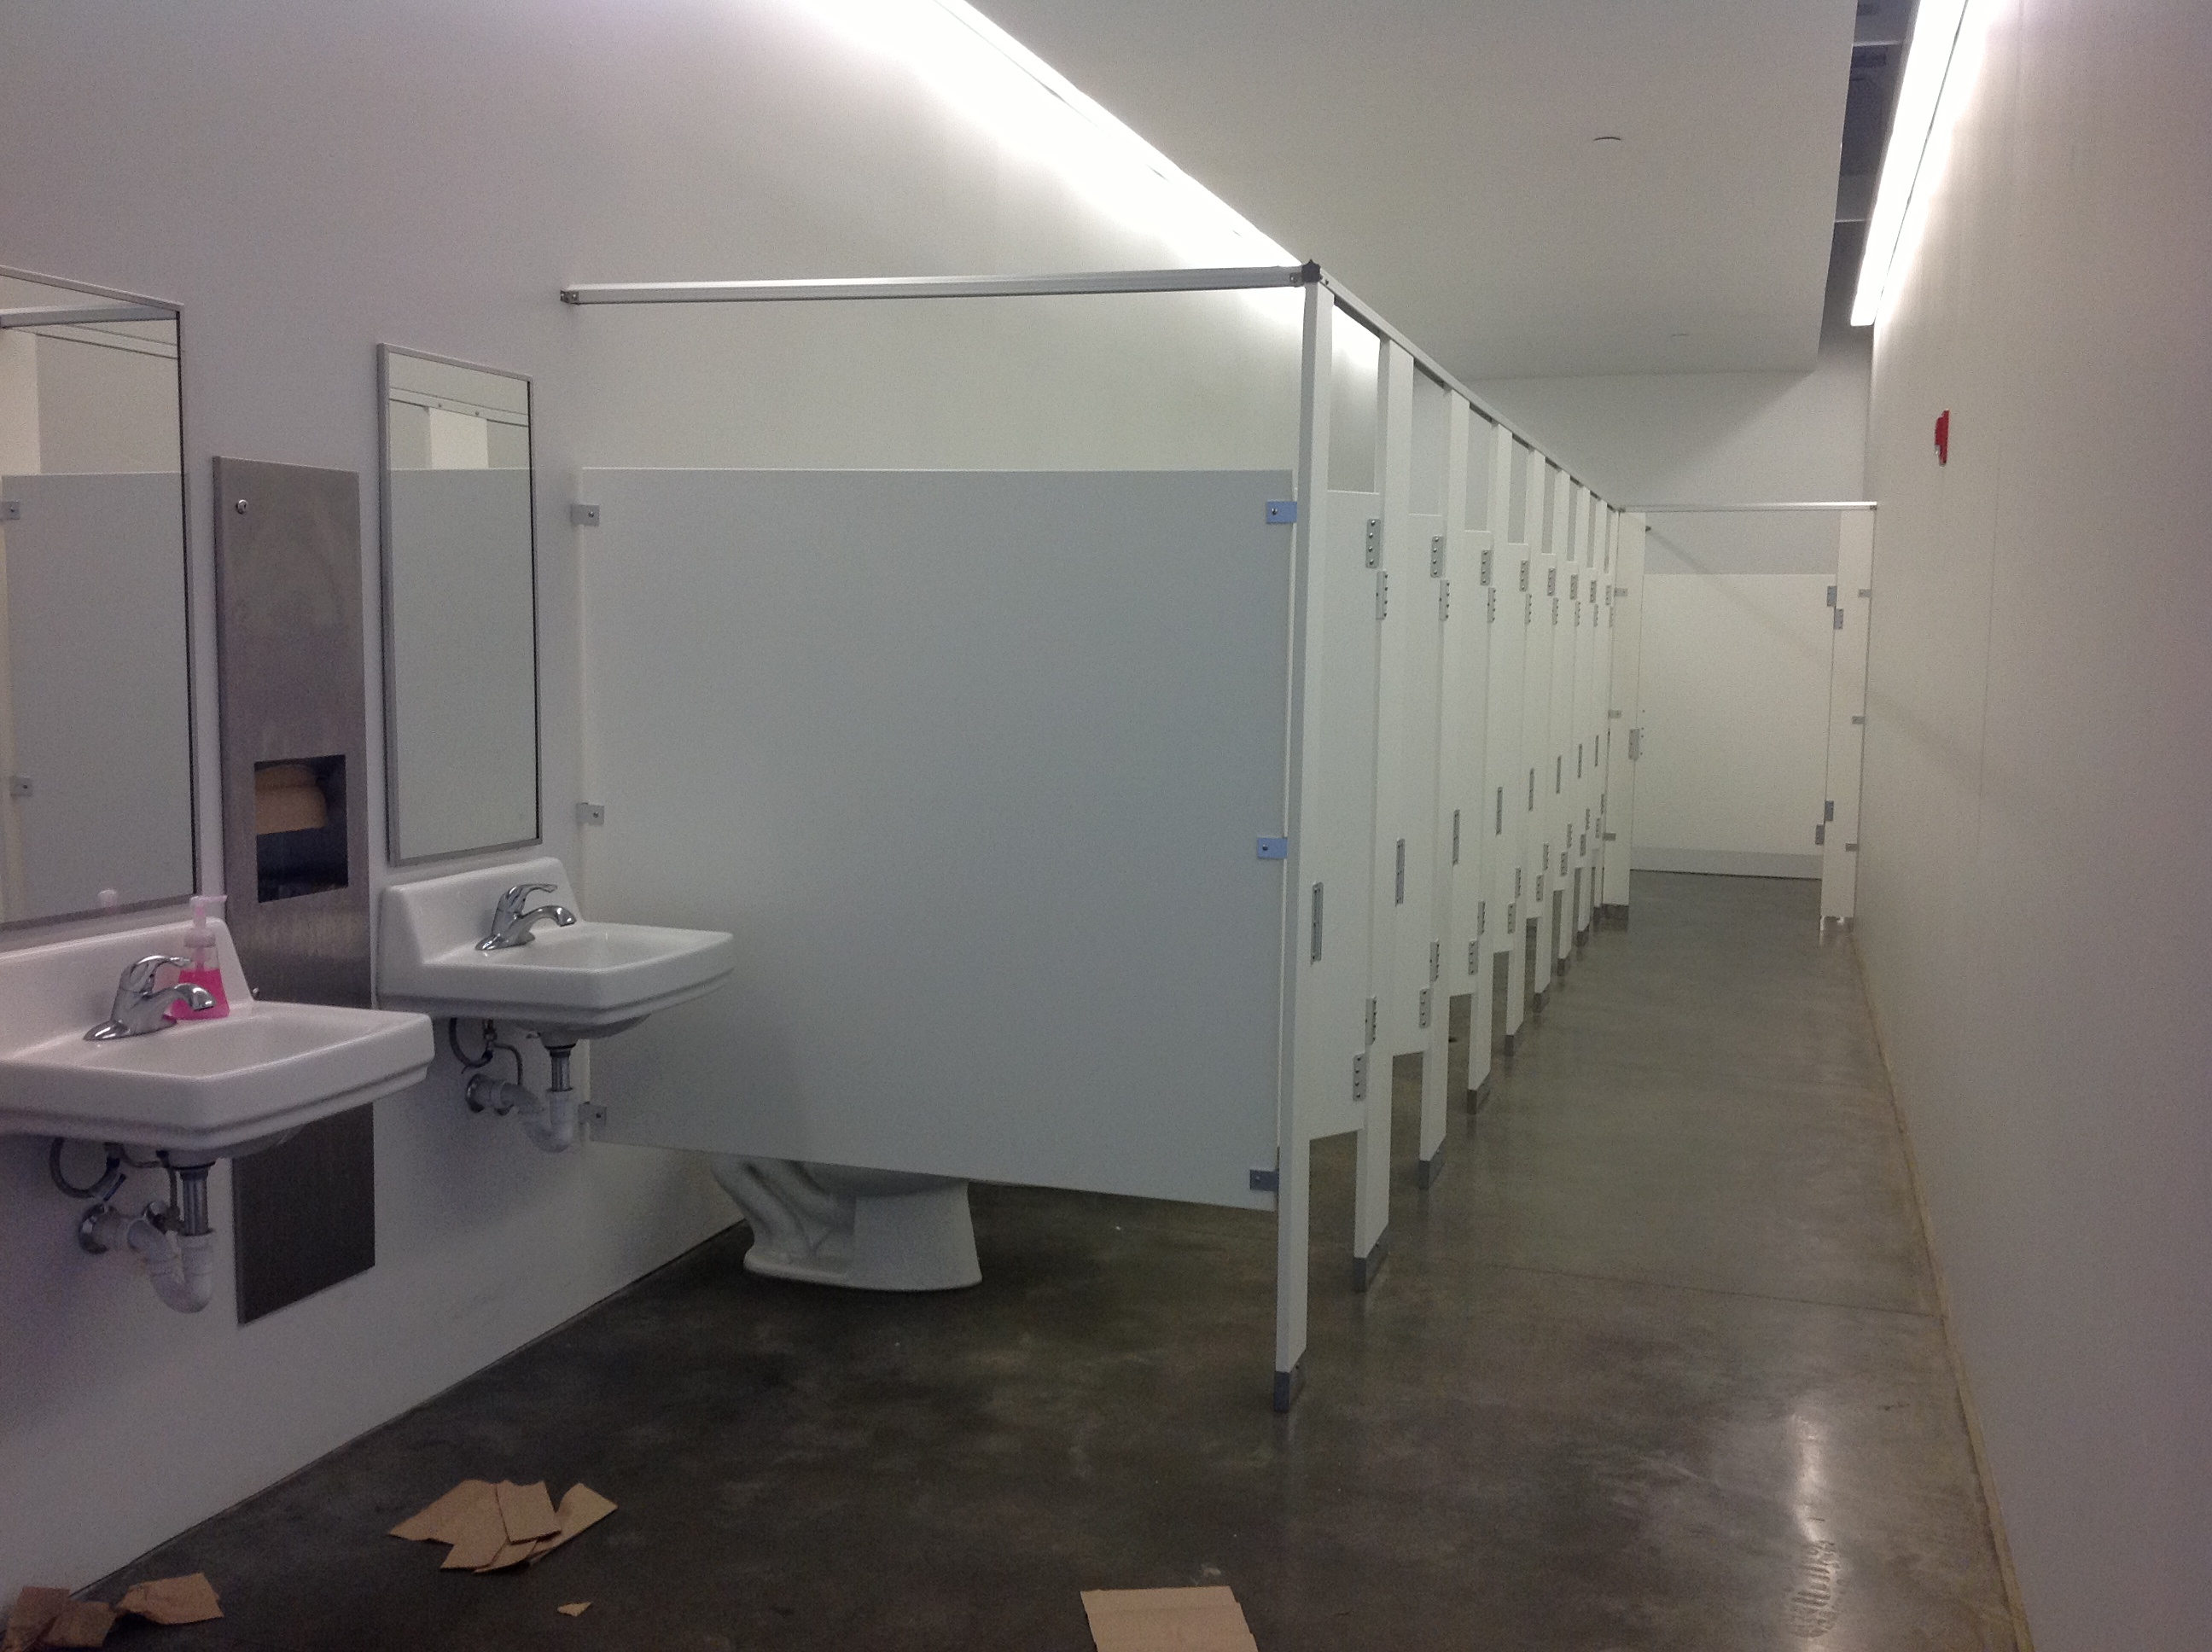 The 6 Real Issues With Public Restrooms